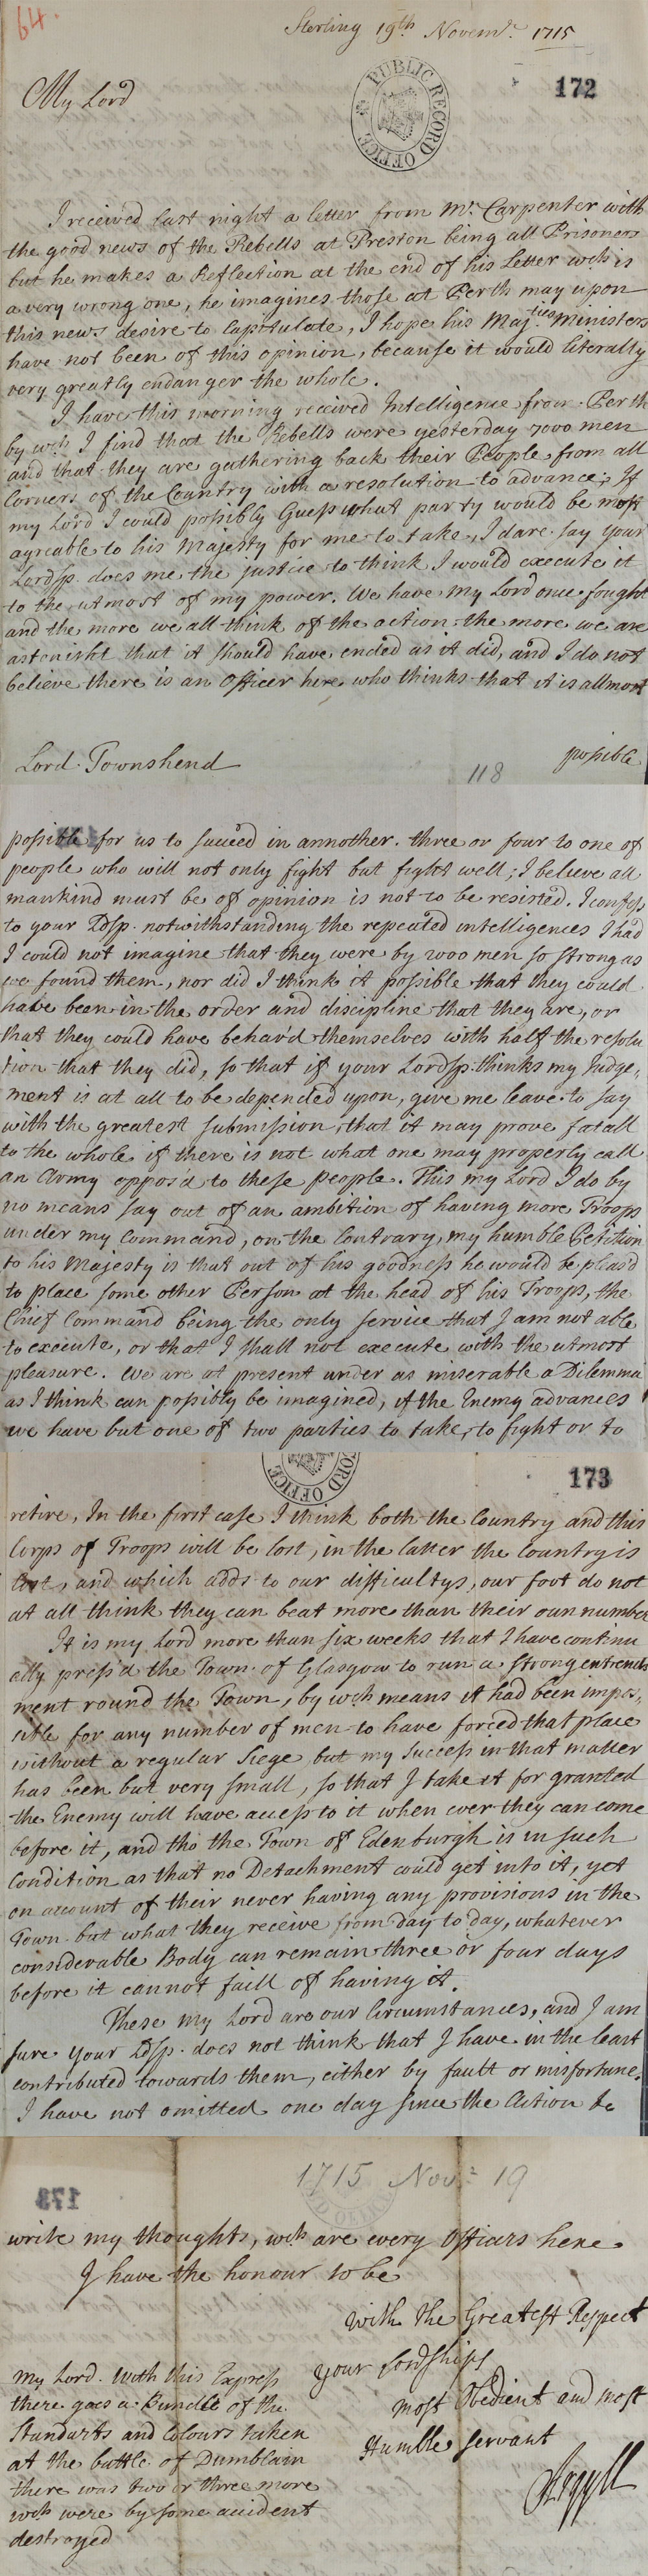 Letter from Lord Argyll to Lord Townshend, Secretary of State, 19 November 1715 (SP 54/10/64)